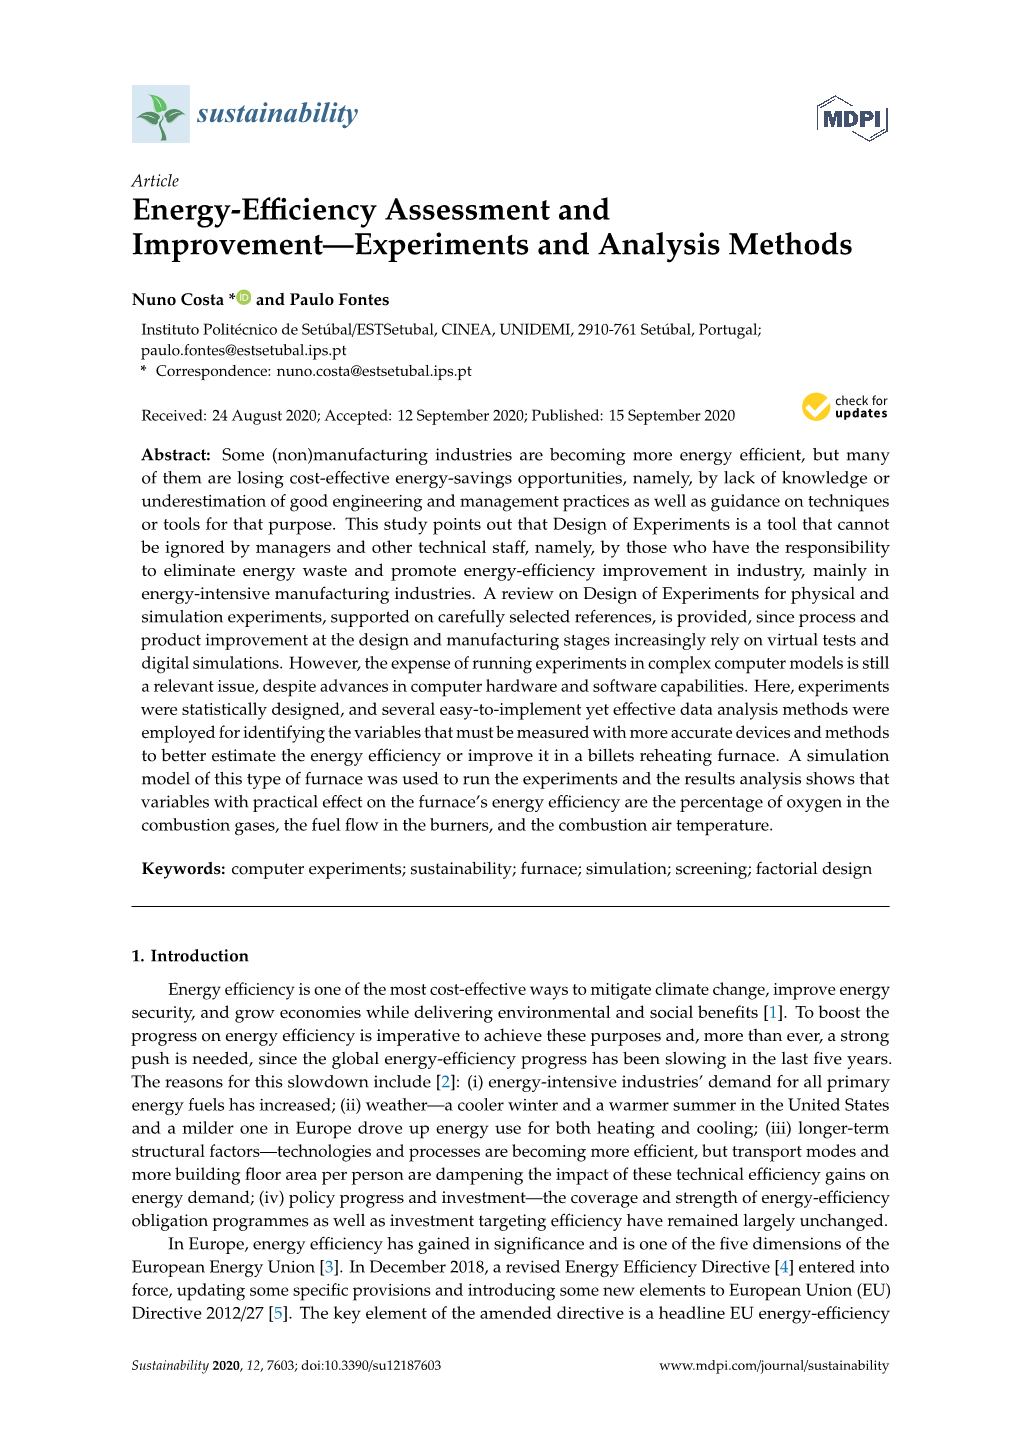 Energy-Efficiency Assessment and Improvement—Experiments